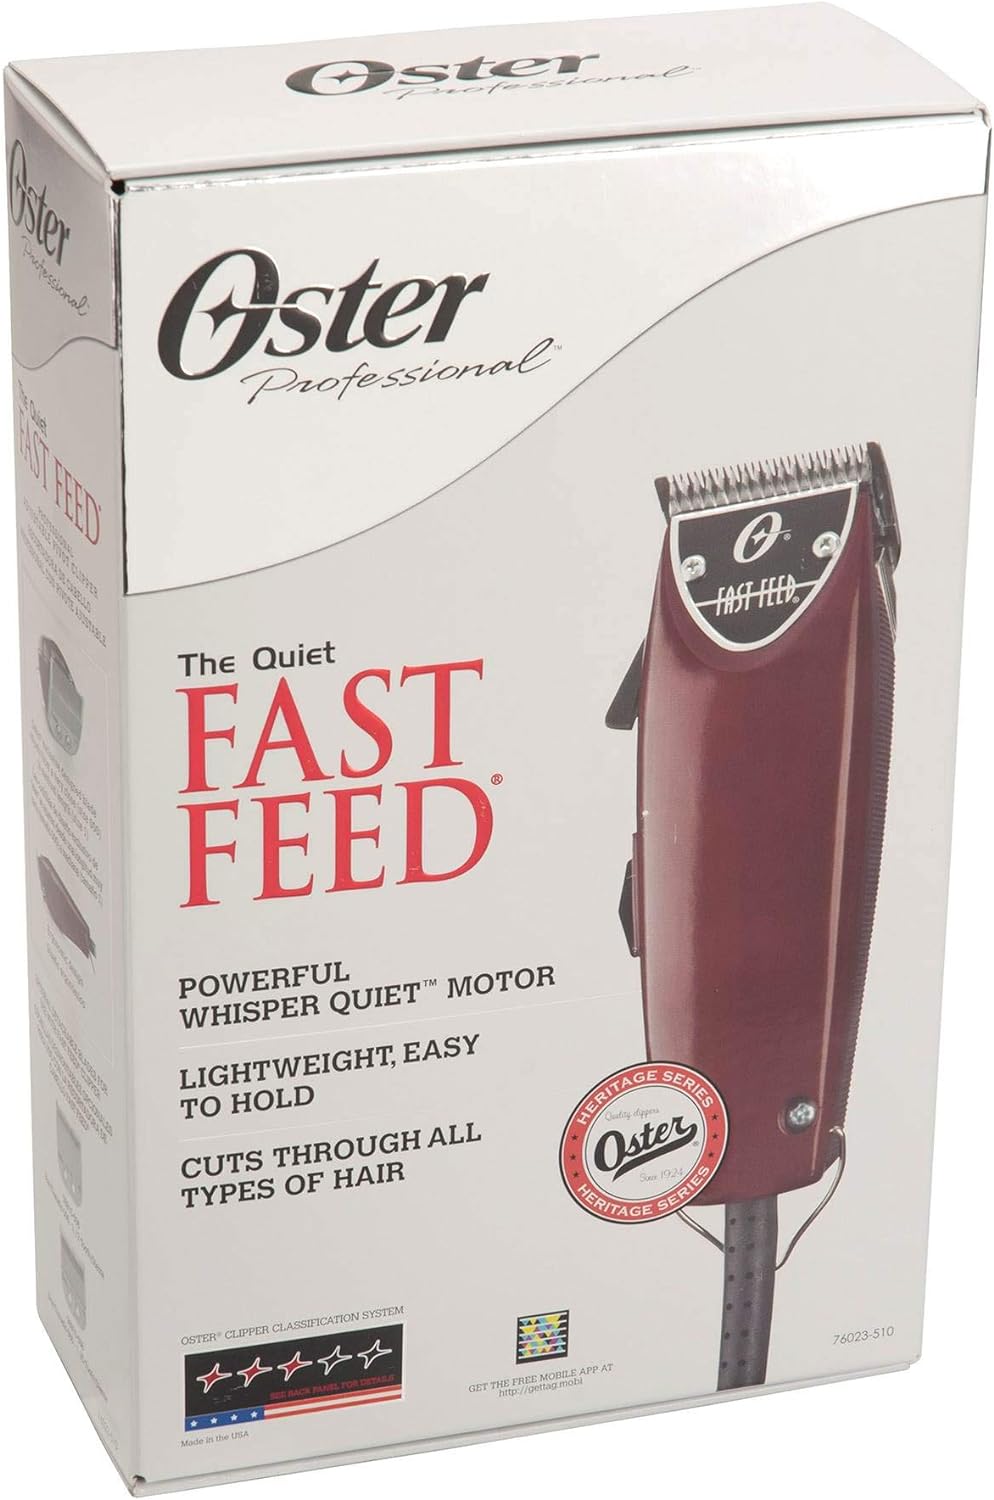 OSTER Fast Feed Adjustable Pivot Motor Clipper 76023-510